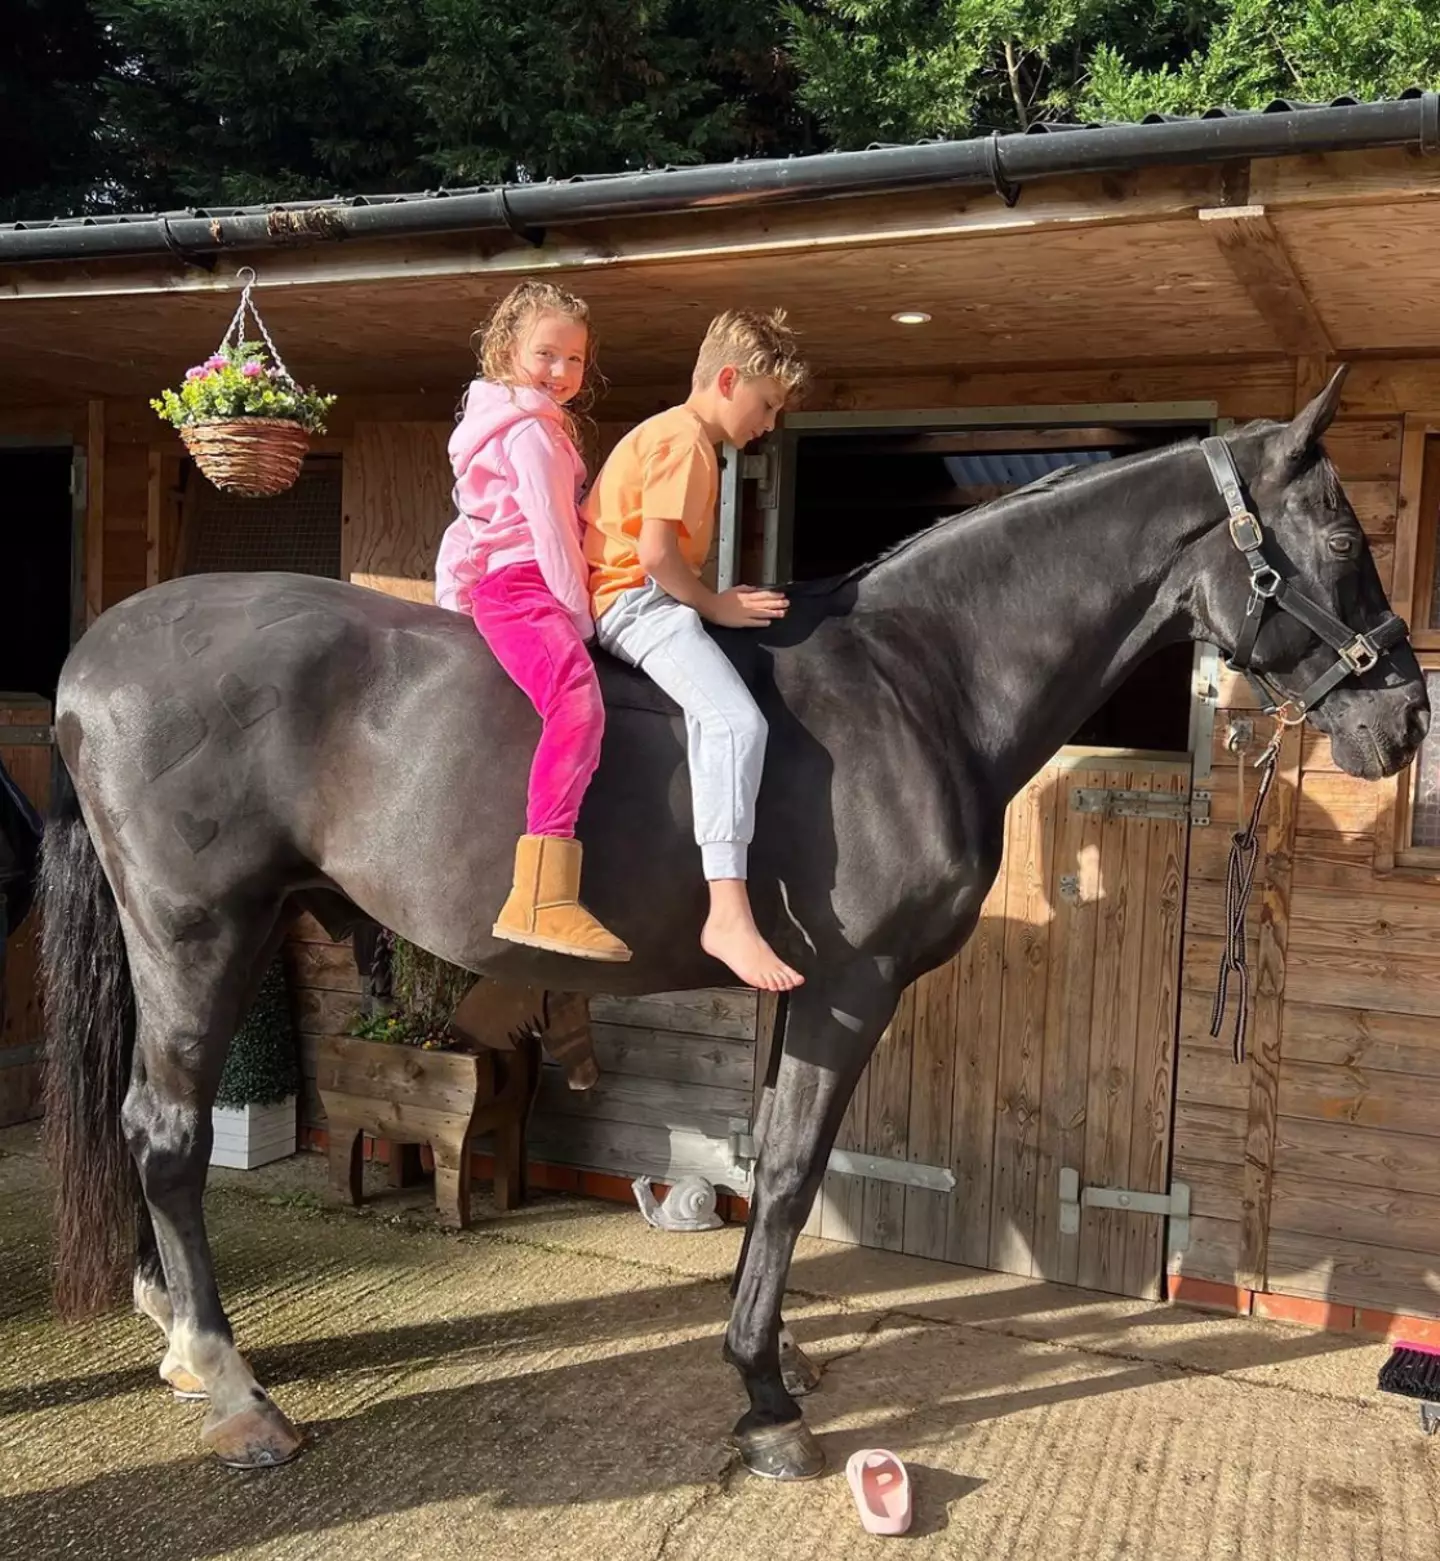 Katie Price has been criticised for picturing her two children - Bunny and Jett - sitting on a stationary horse without protective helmets.